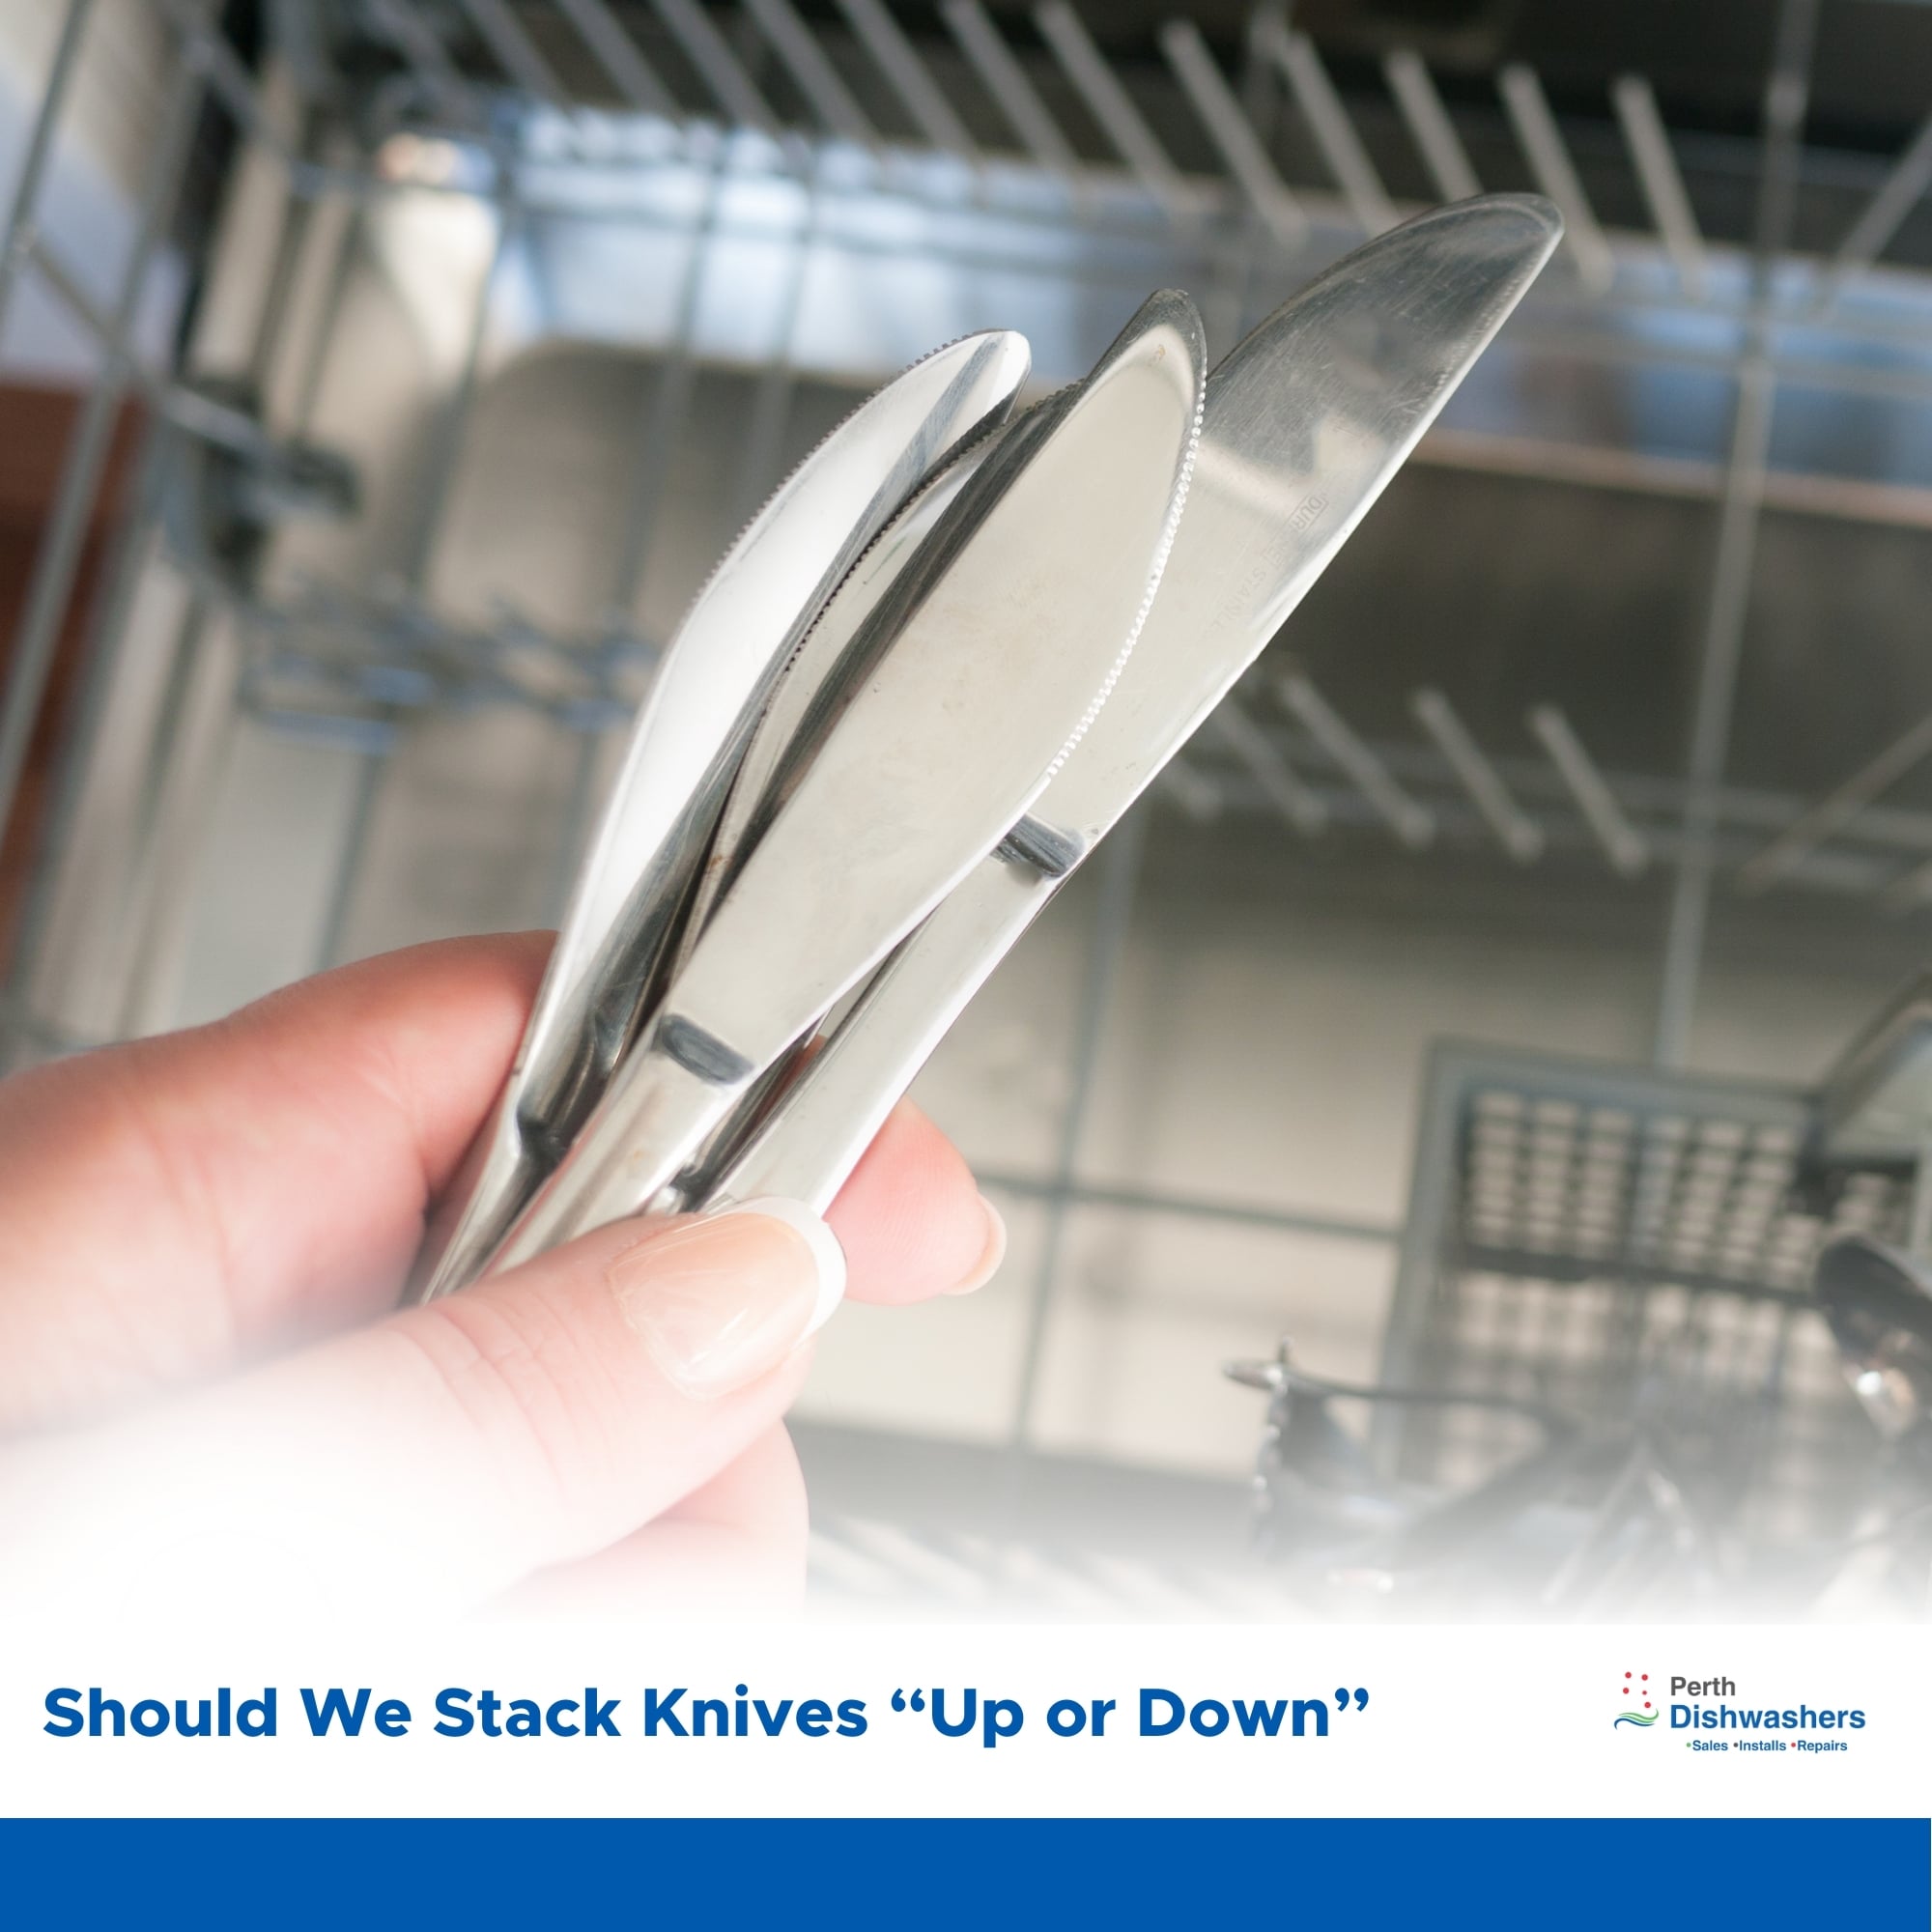 should we stack knives “up or down”